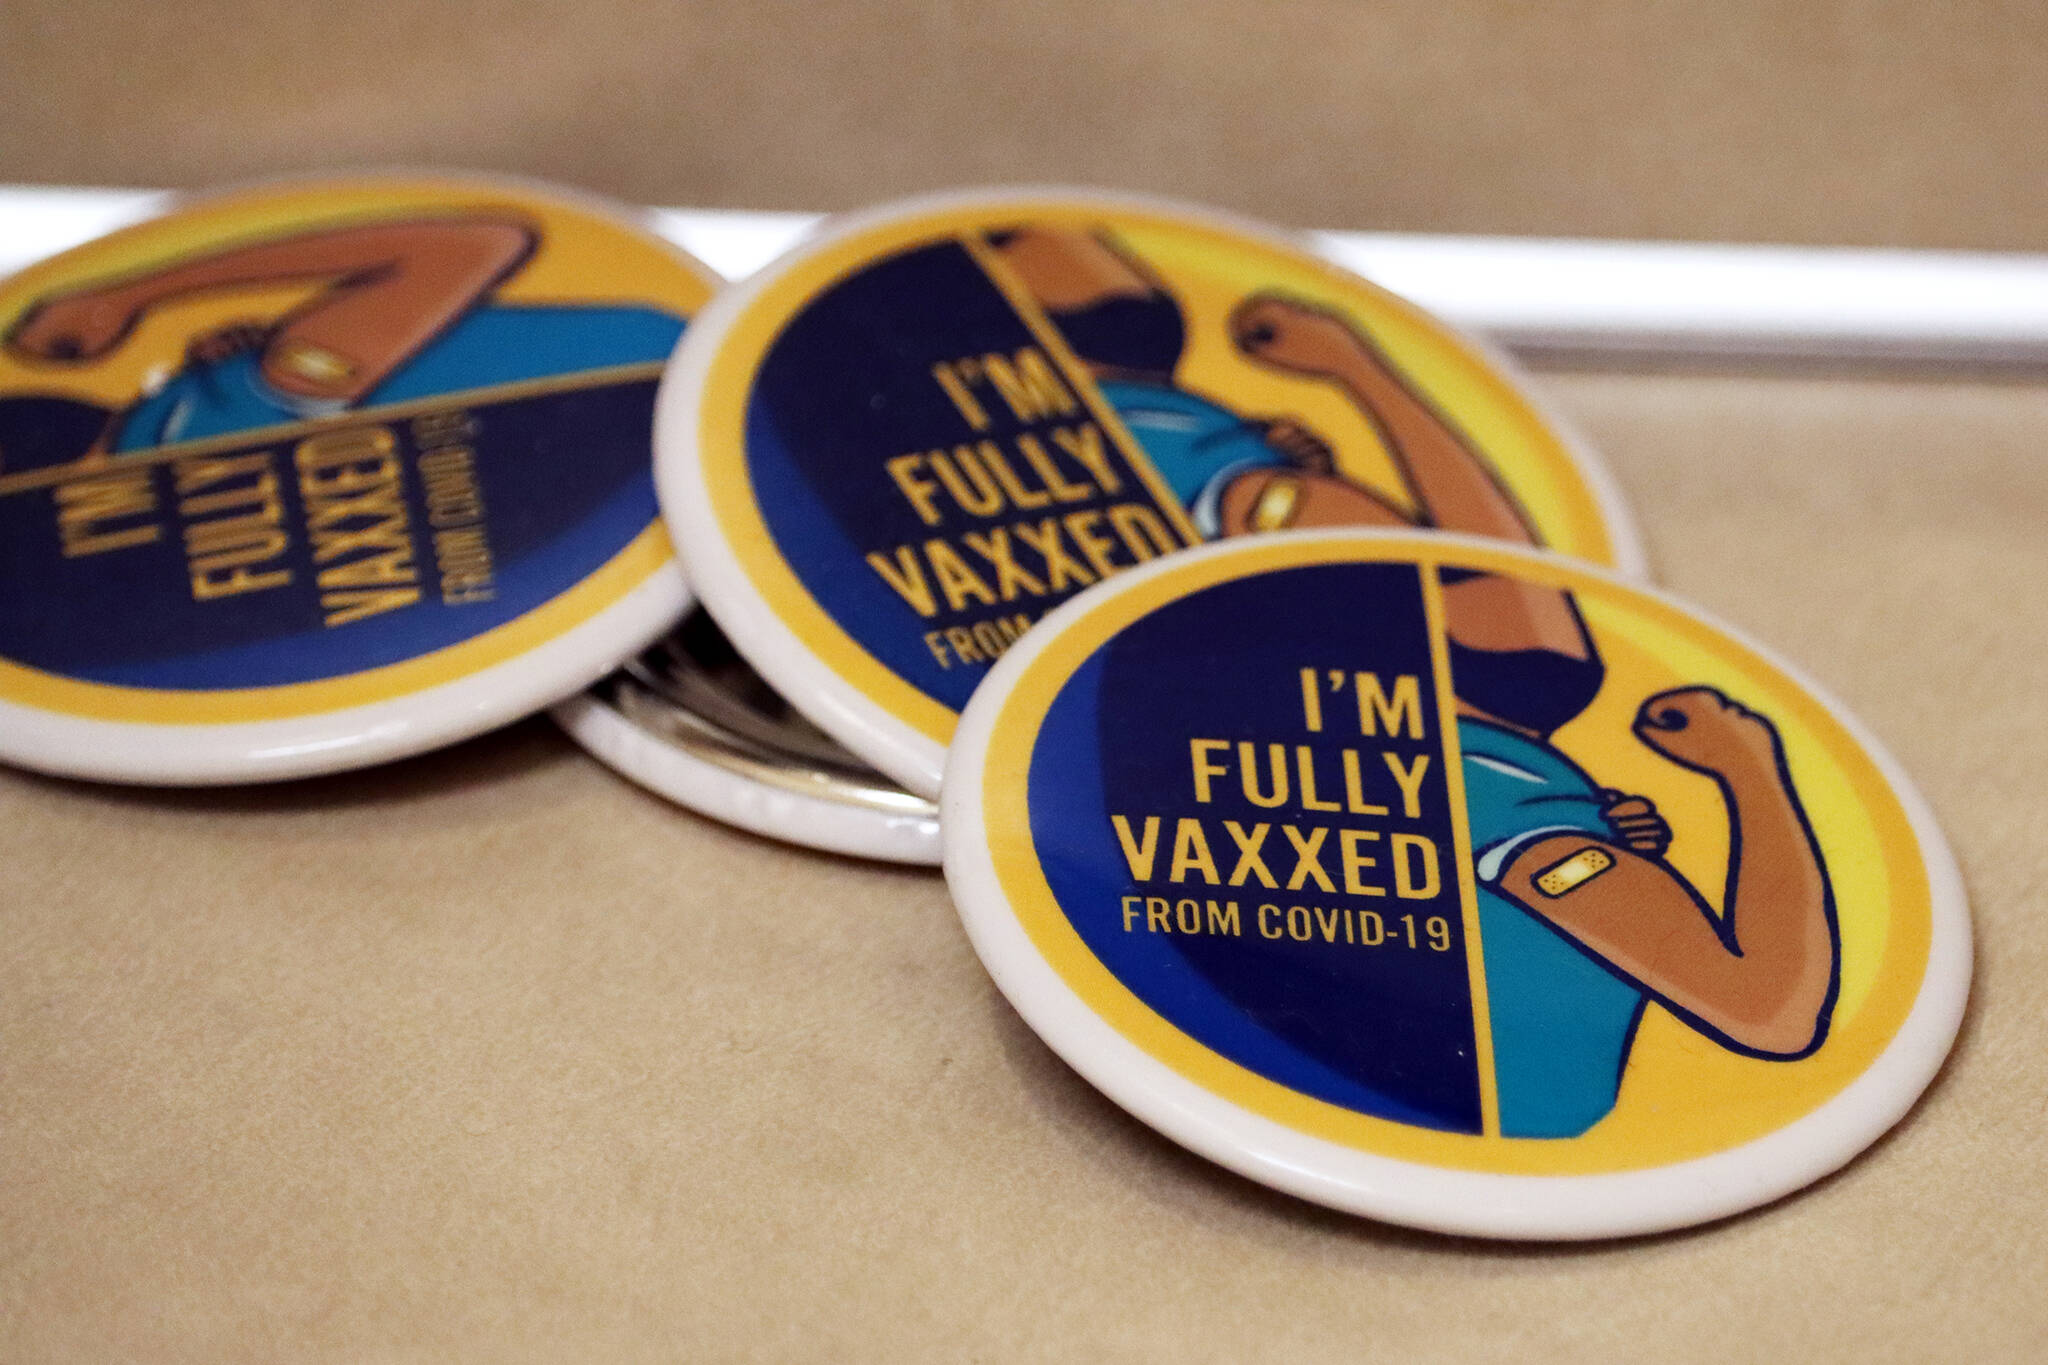 ”I’m full vaxxed from COVID,” read buttons at the Juneau Public Health Center in late November. Juneau’s relatively high vaccination rate plays a role in the local response to the ongoing pandemic. At Monday night’s Committee of the Whole meeting, City Assembly members agreed to move a step closer to “modest relaxations” to the city’s COVID-19 mitigation strategies and heard from state experts who praised Juneau’s performance in keeping the worst at bay so far. (Ben Hohenstatt / Juneau Empire)